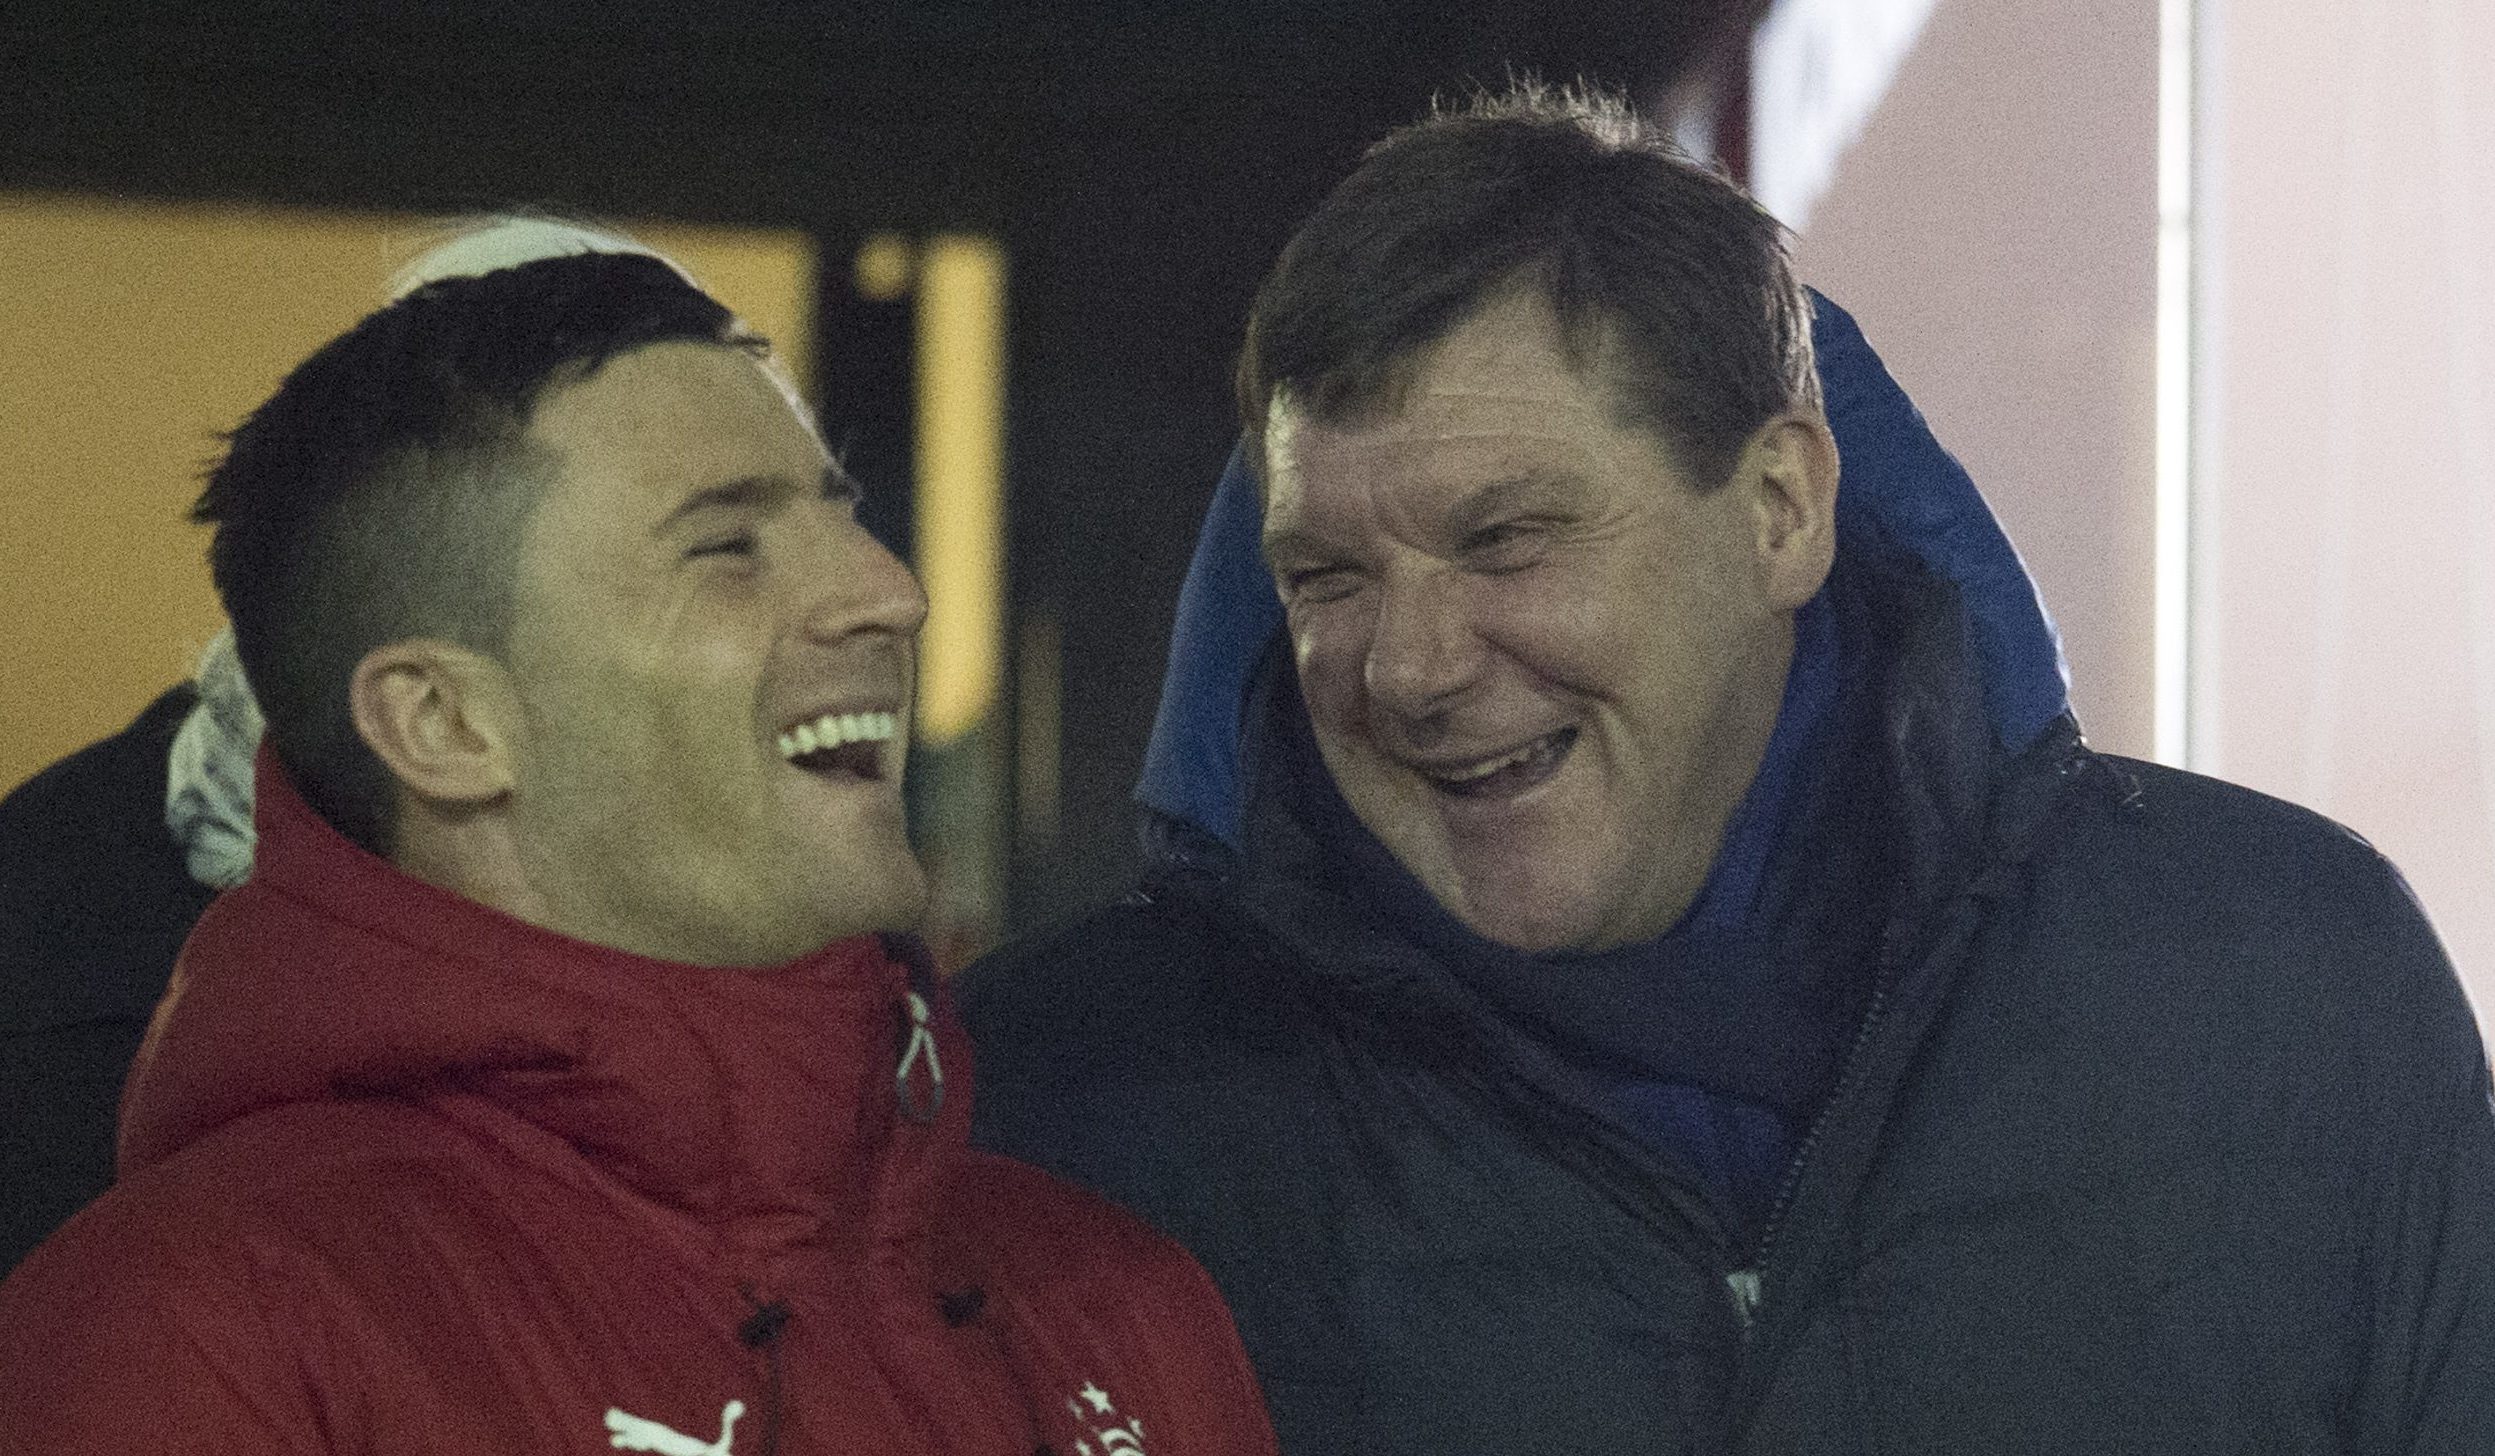 Will Michael O'Halloran and Tommy Wright be reunited at McDiarmid Park?